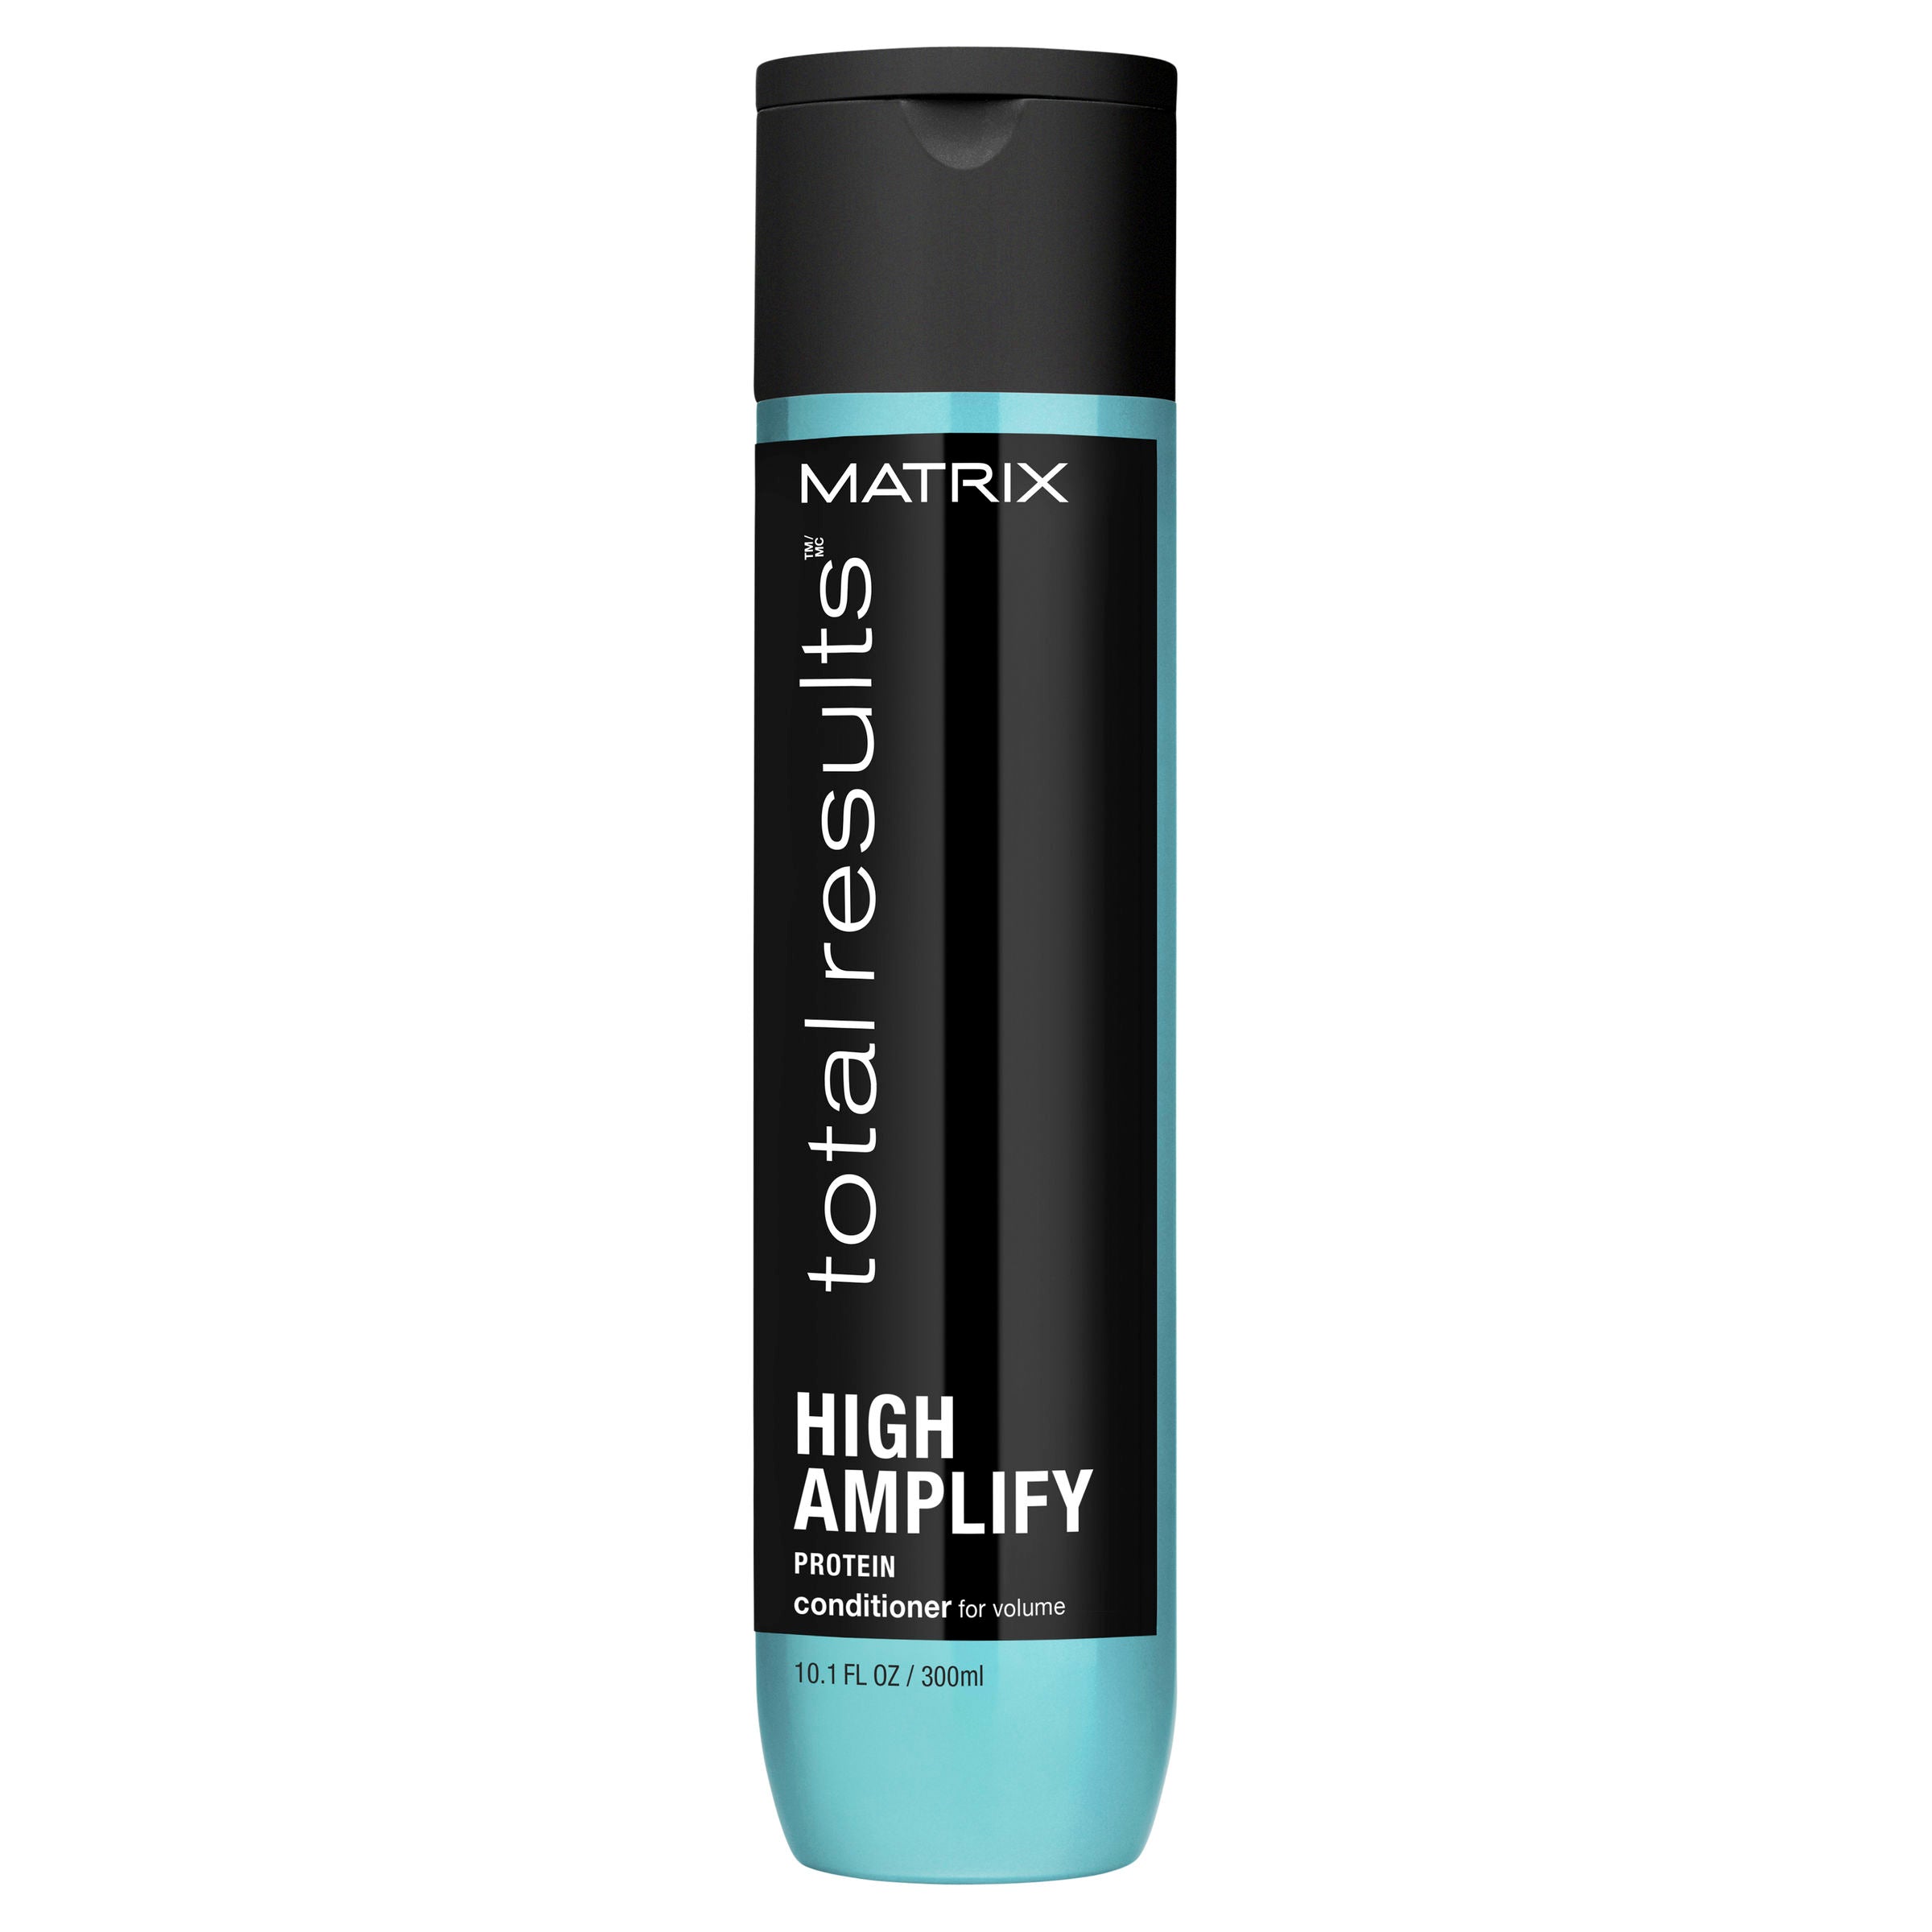 Matrix Total Results High Amplify Conditioner helps boost the structure of fine, limp hair, for lasting volume - 300 ml